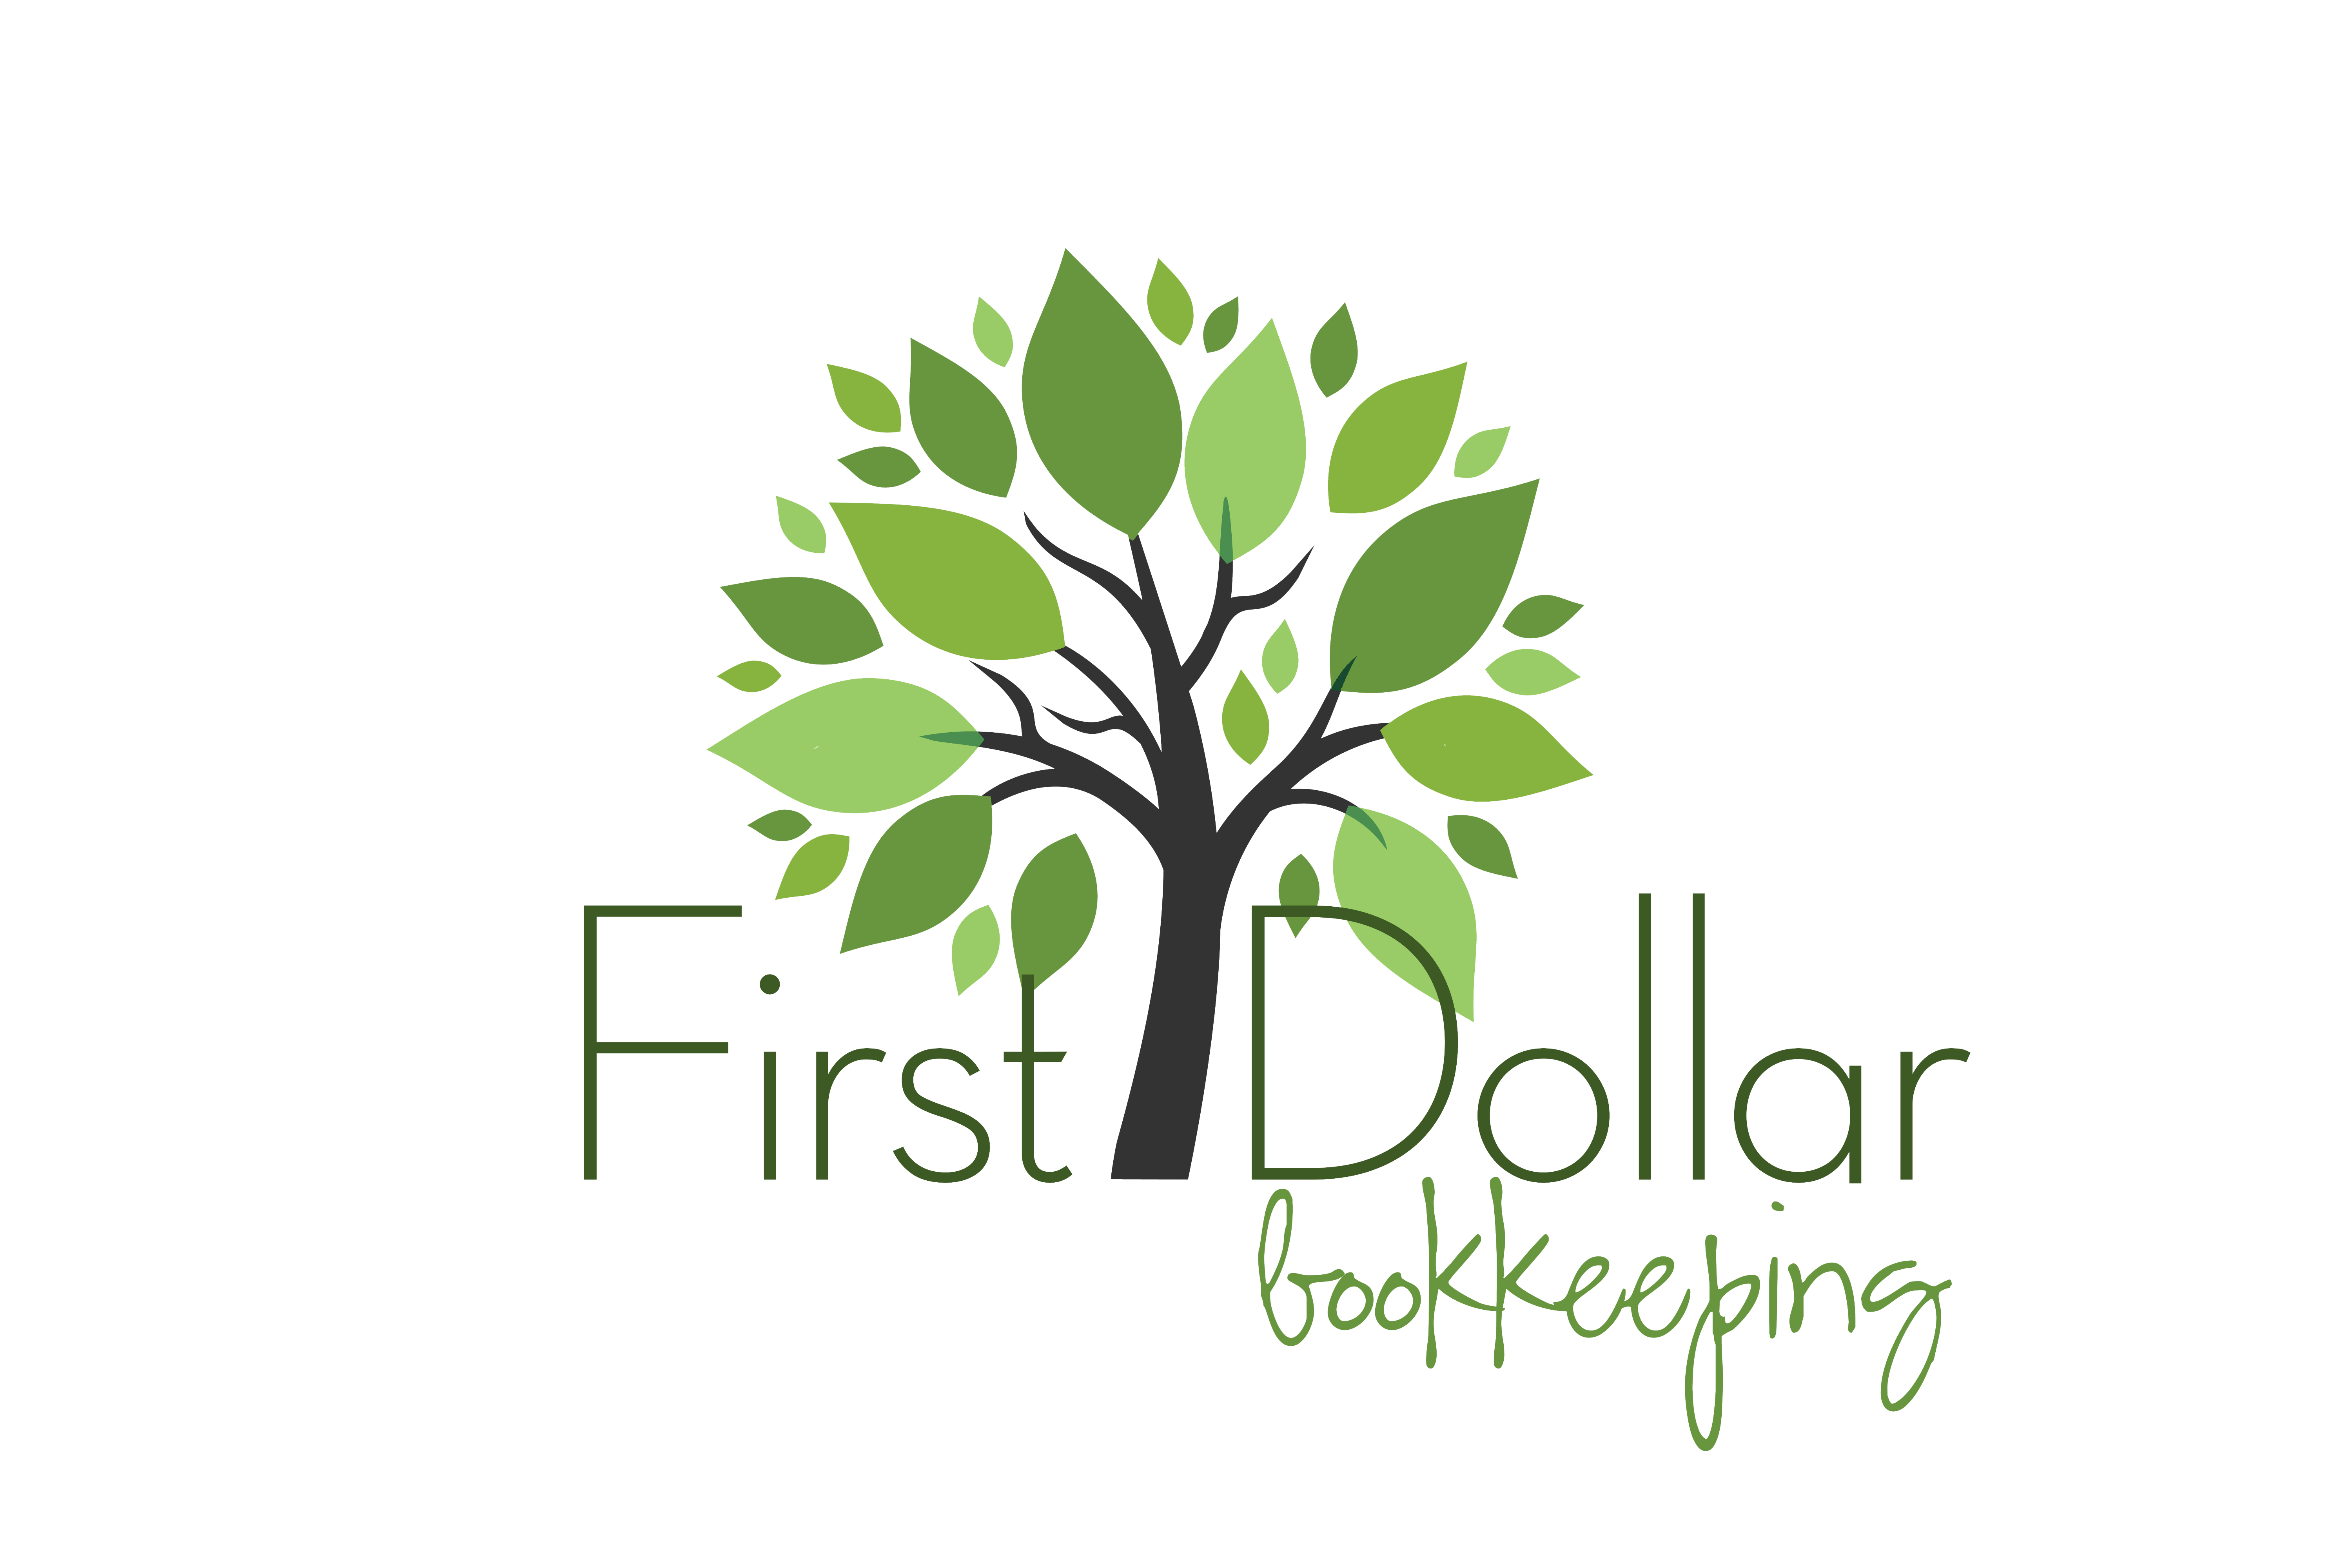 First Dollar Bookkeeping